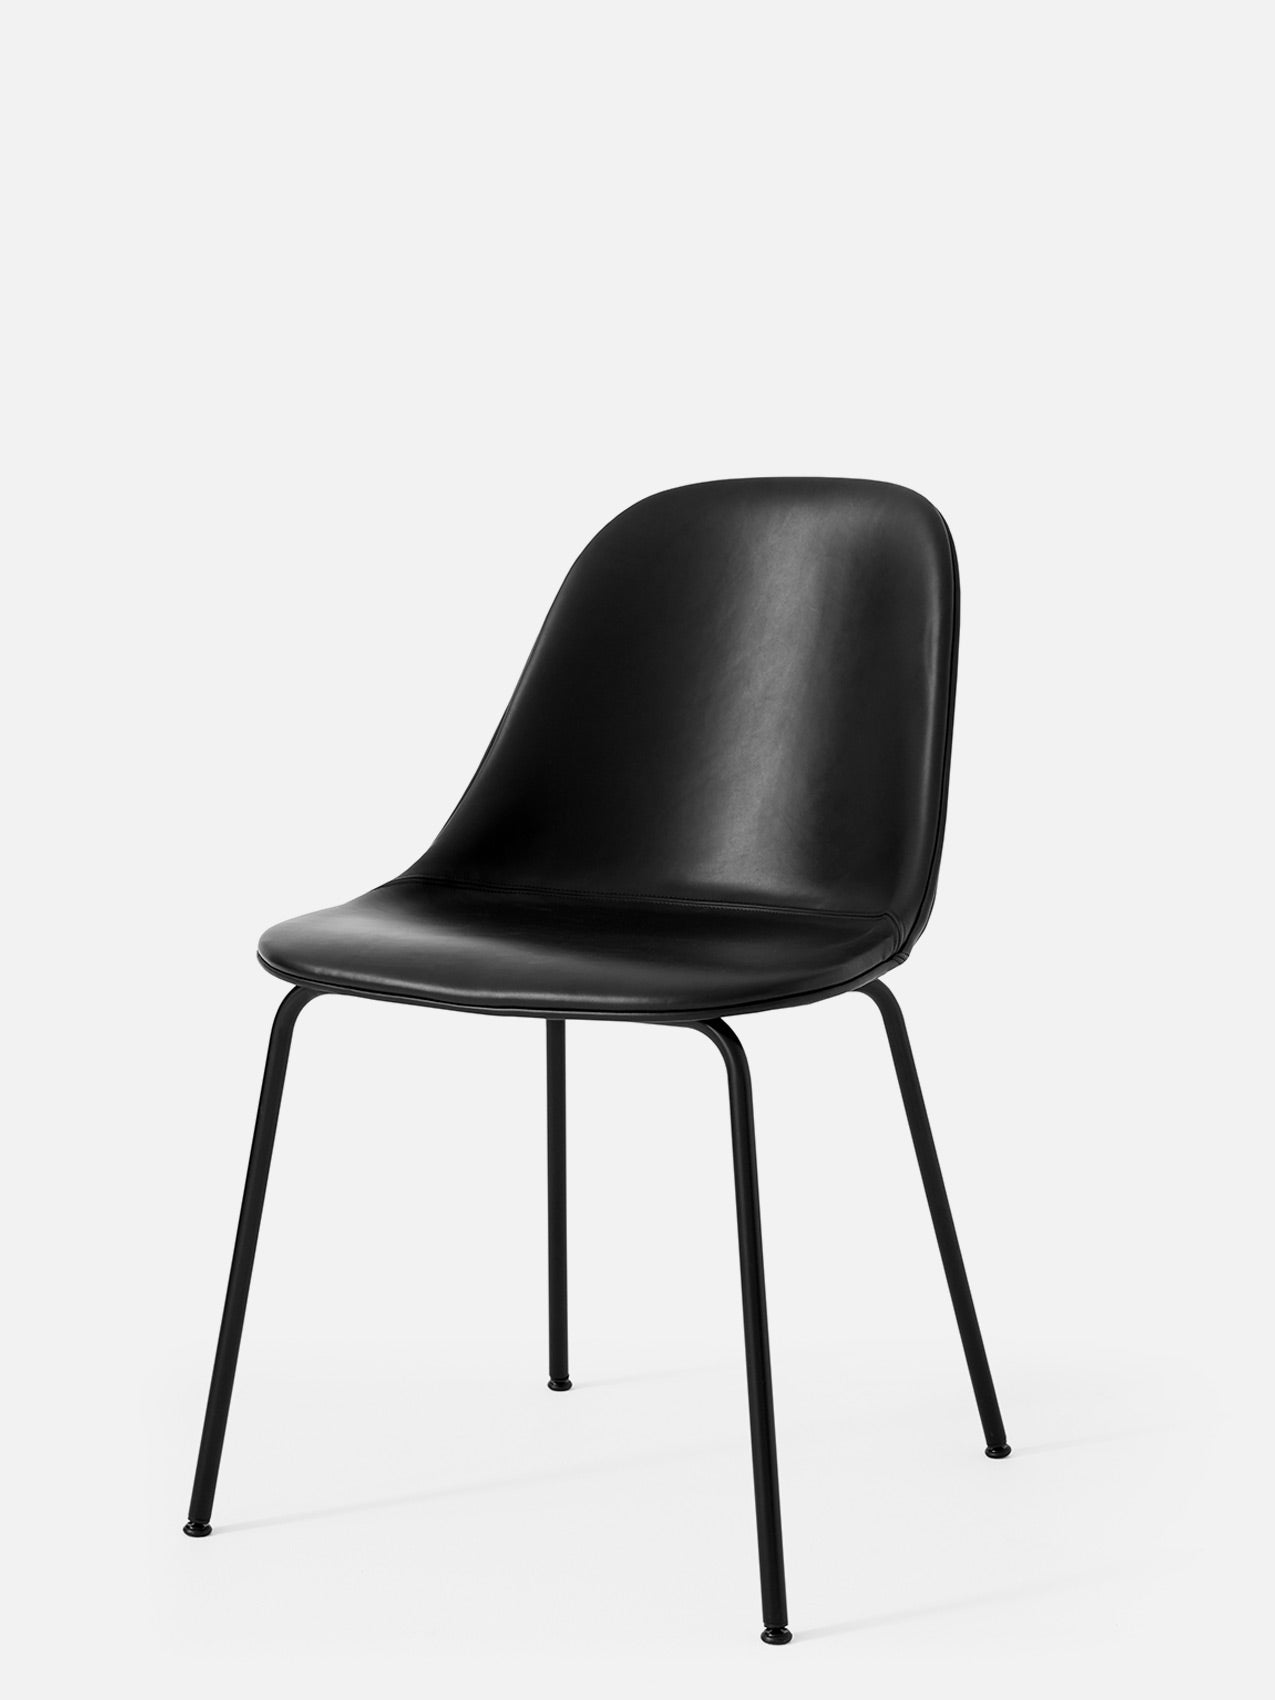 Harbour Side Chair, Upholstered-Chair-Norm Architects-Dining Height (Seat 17.7in H)/Black Steel-0842 Black/Dakar-menu-minimalist-modern-danish-design-home-decor